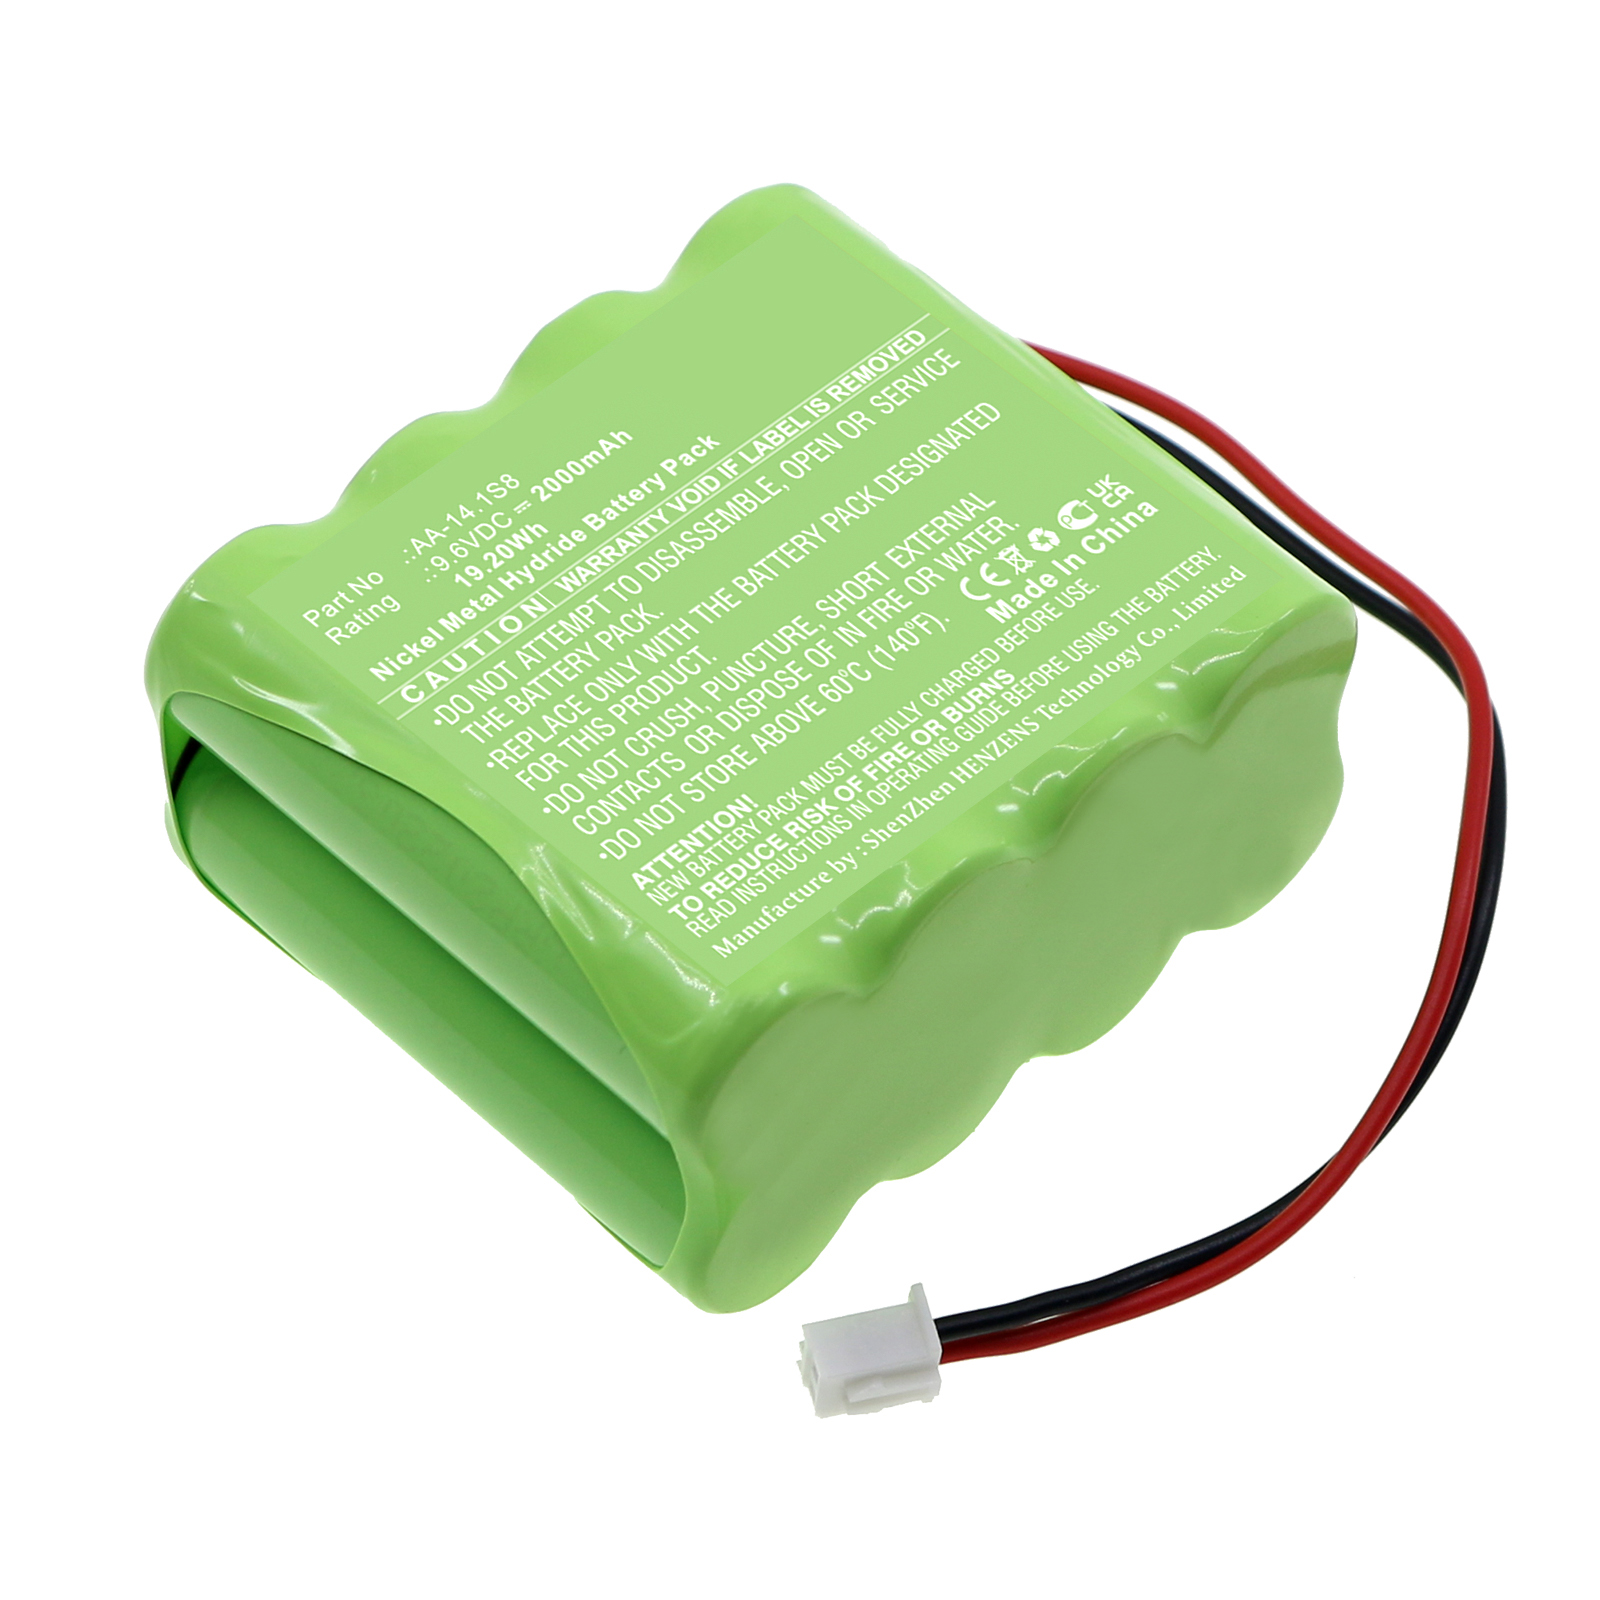 Synergy Digital Medical Battery, Compatible with Medima AA-14.1S8 Medical Battery (Ni-MH, 9.6V, 2000mAh)